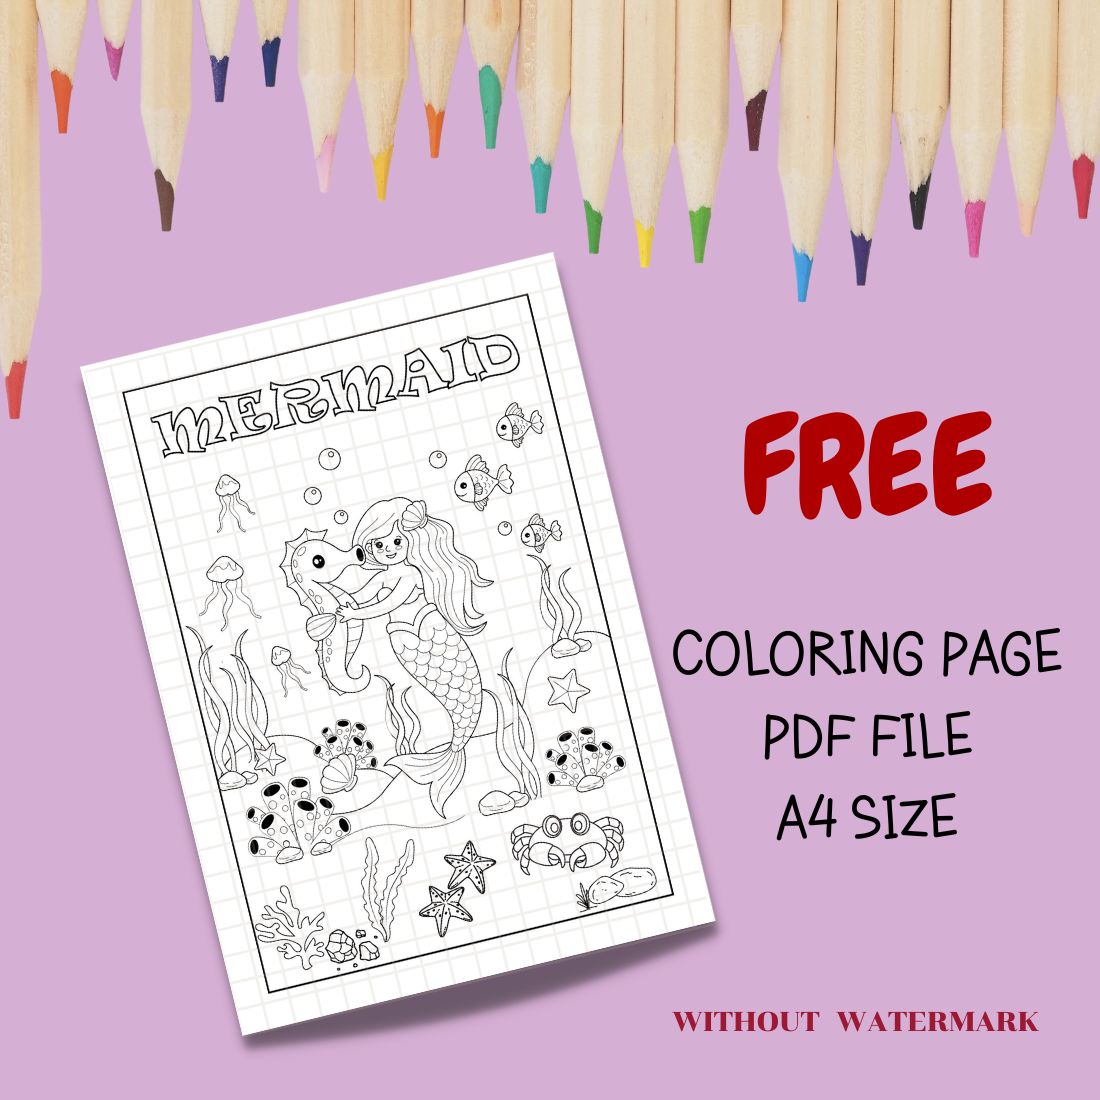 FREE MERMAID COLORING PAGE cover image.